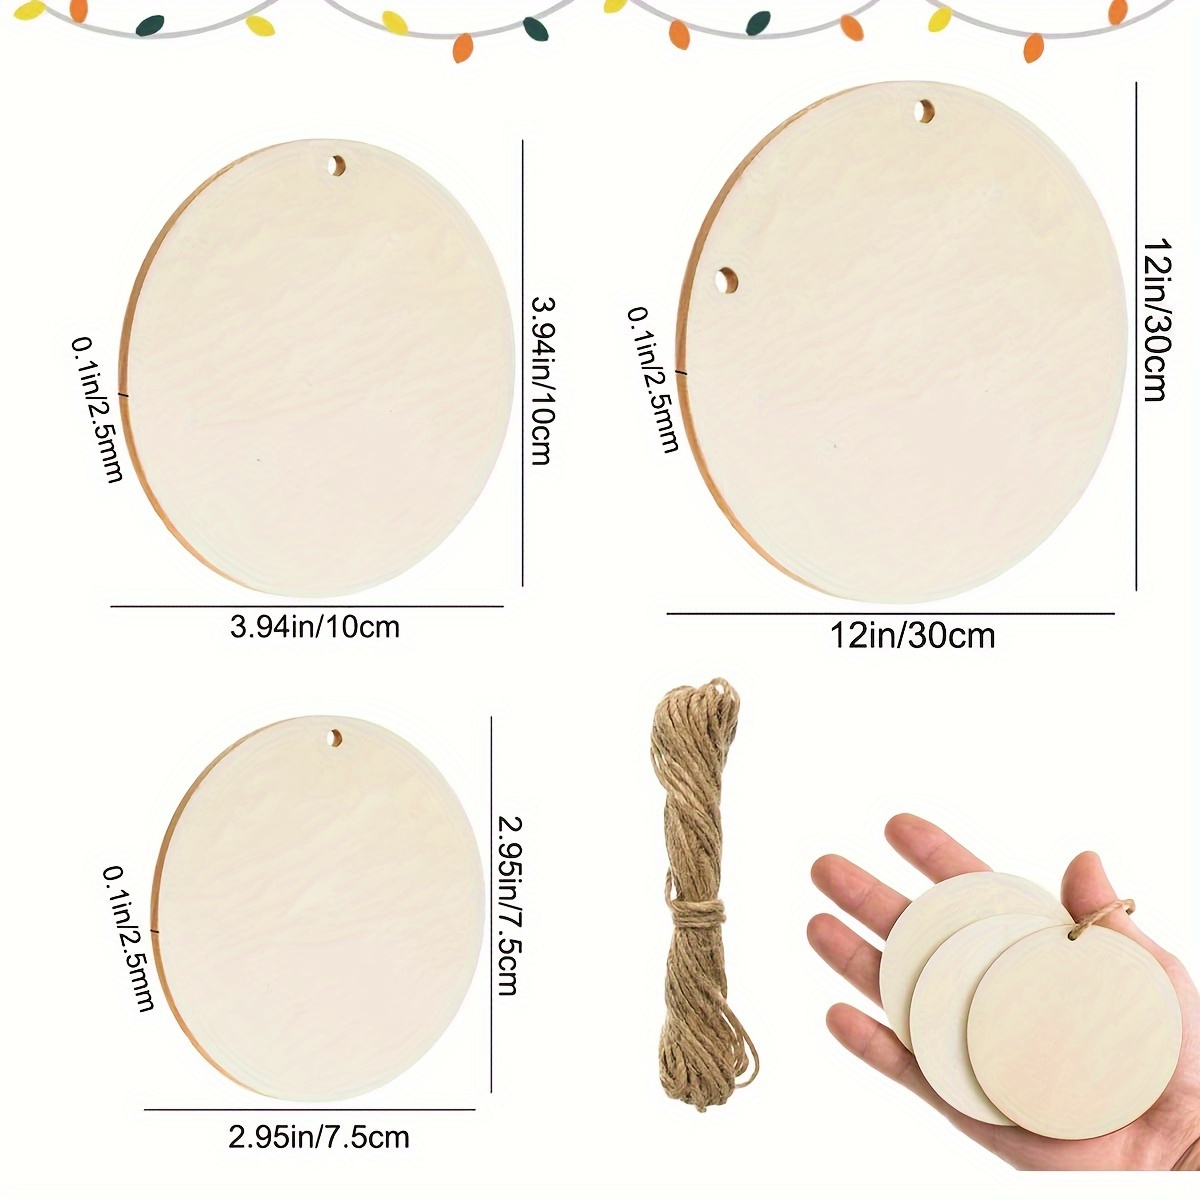 10pcs Wooden Circles for Crafts, 12 Inch Wood Rounds, Natural Round Wooden  Discs, Wooden Rounds for Crafts, Christmas Ornaments, Centerpieces &  Paintings,Fall Decor Home Decorations.